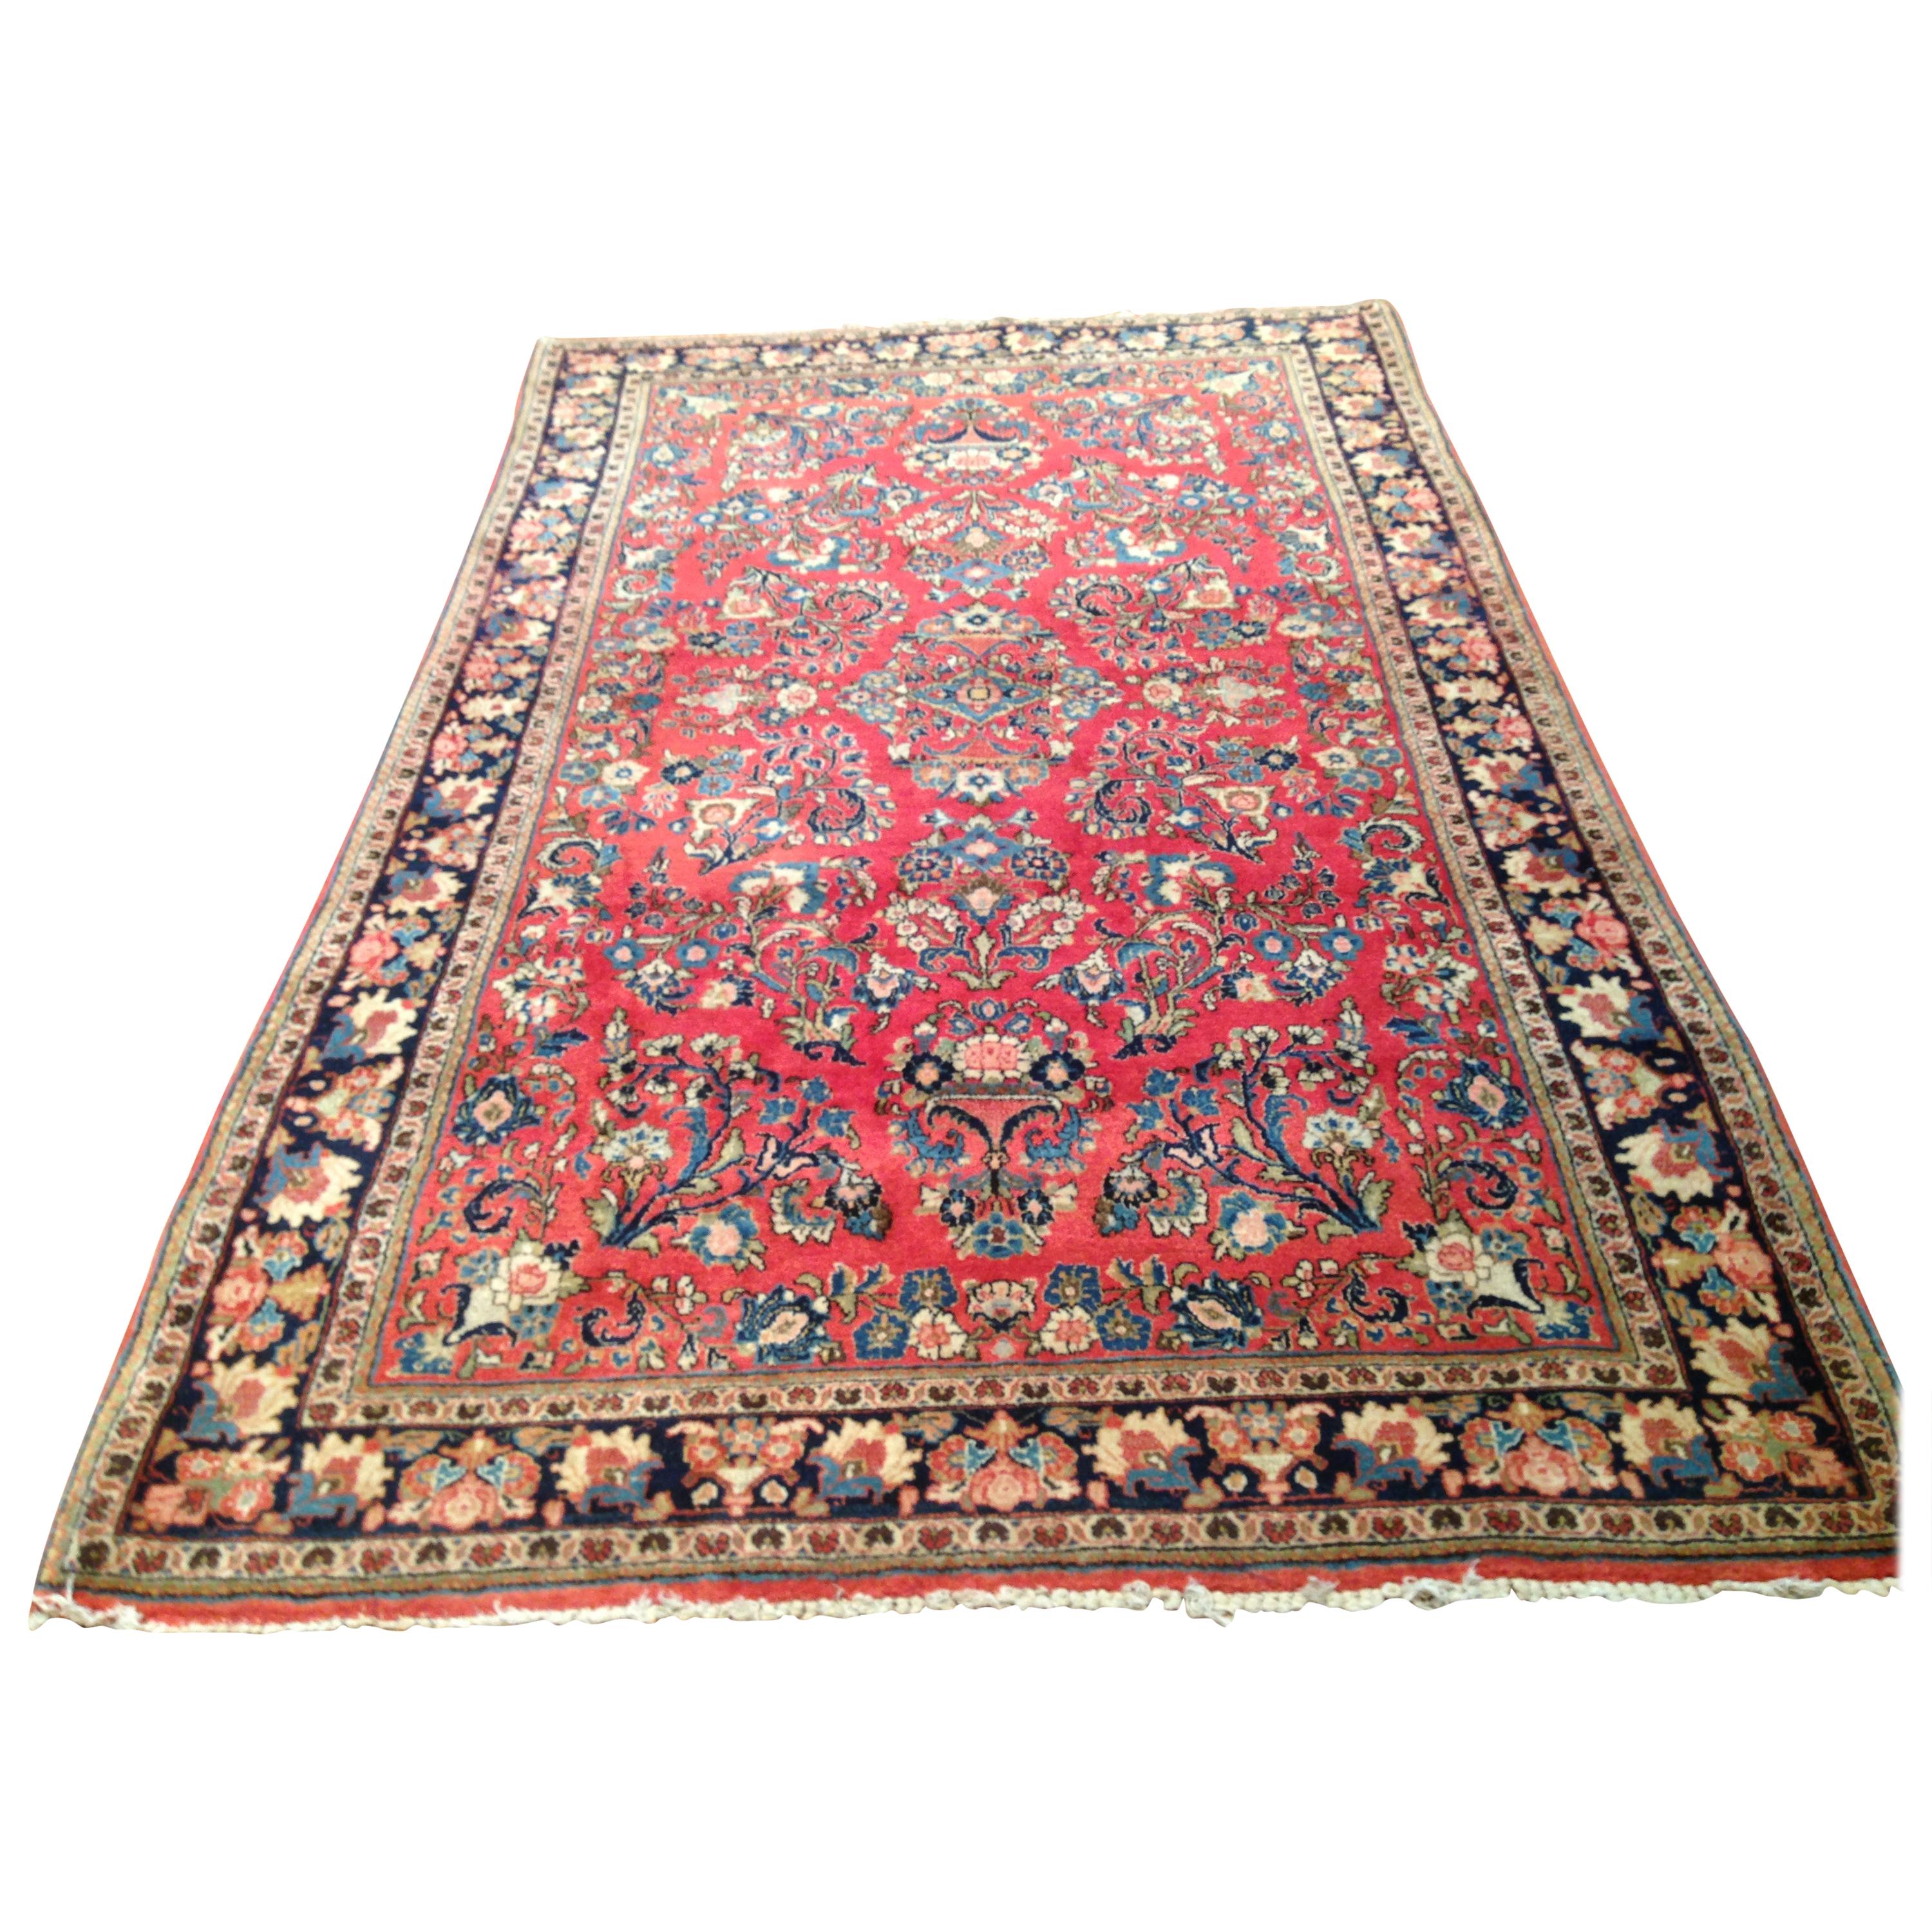 Antique Red Gold Floral Persian Sarouk Small Area Rug, circa 1930s